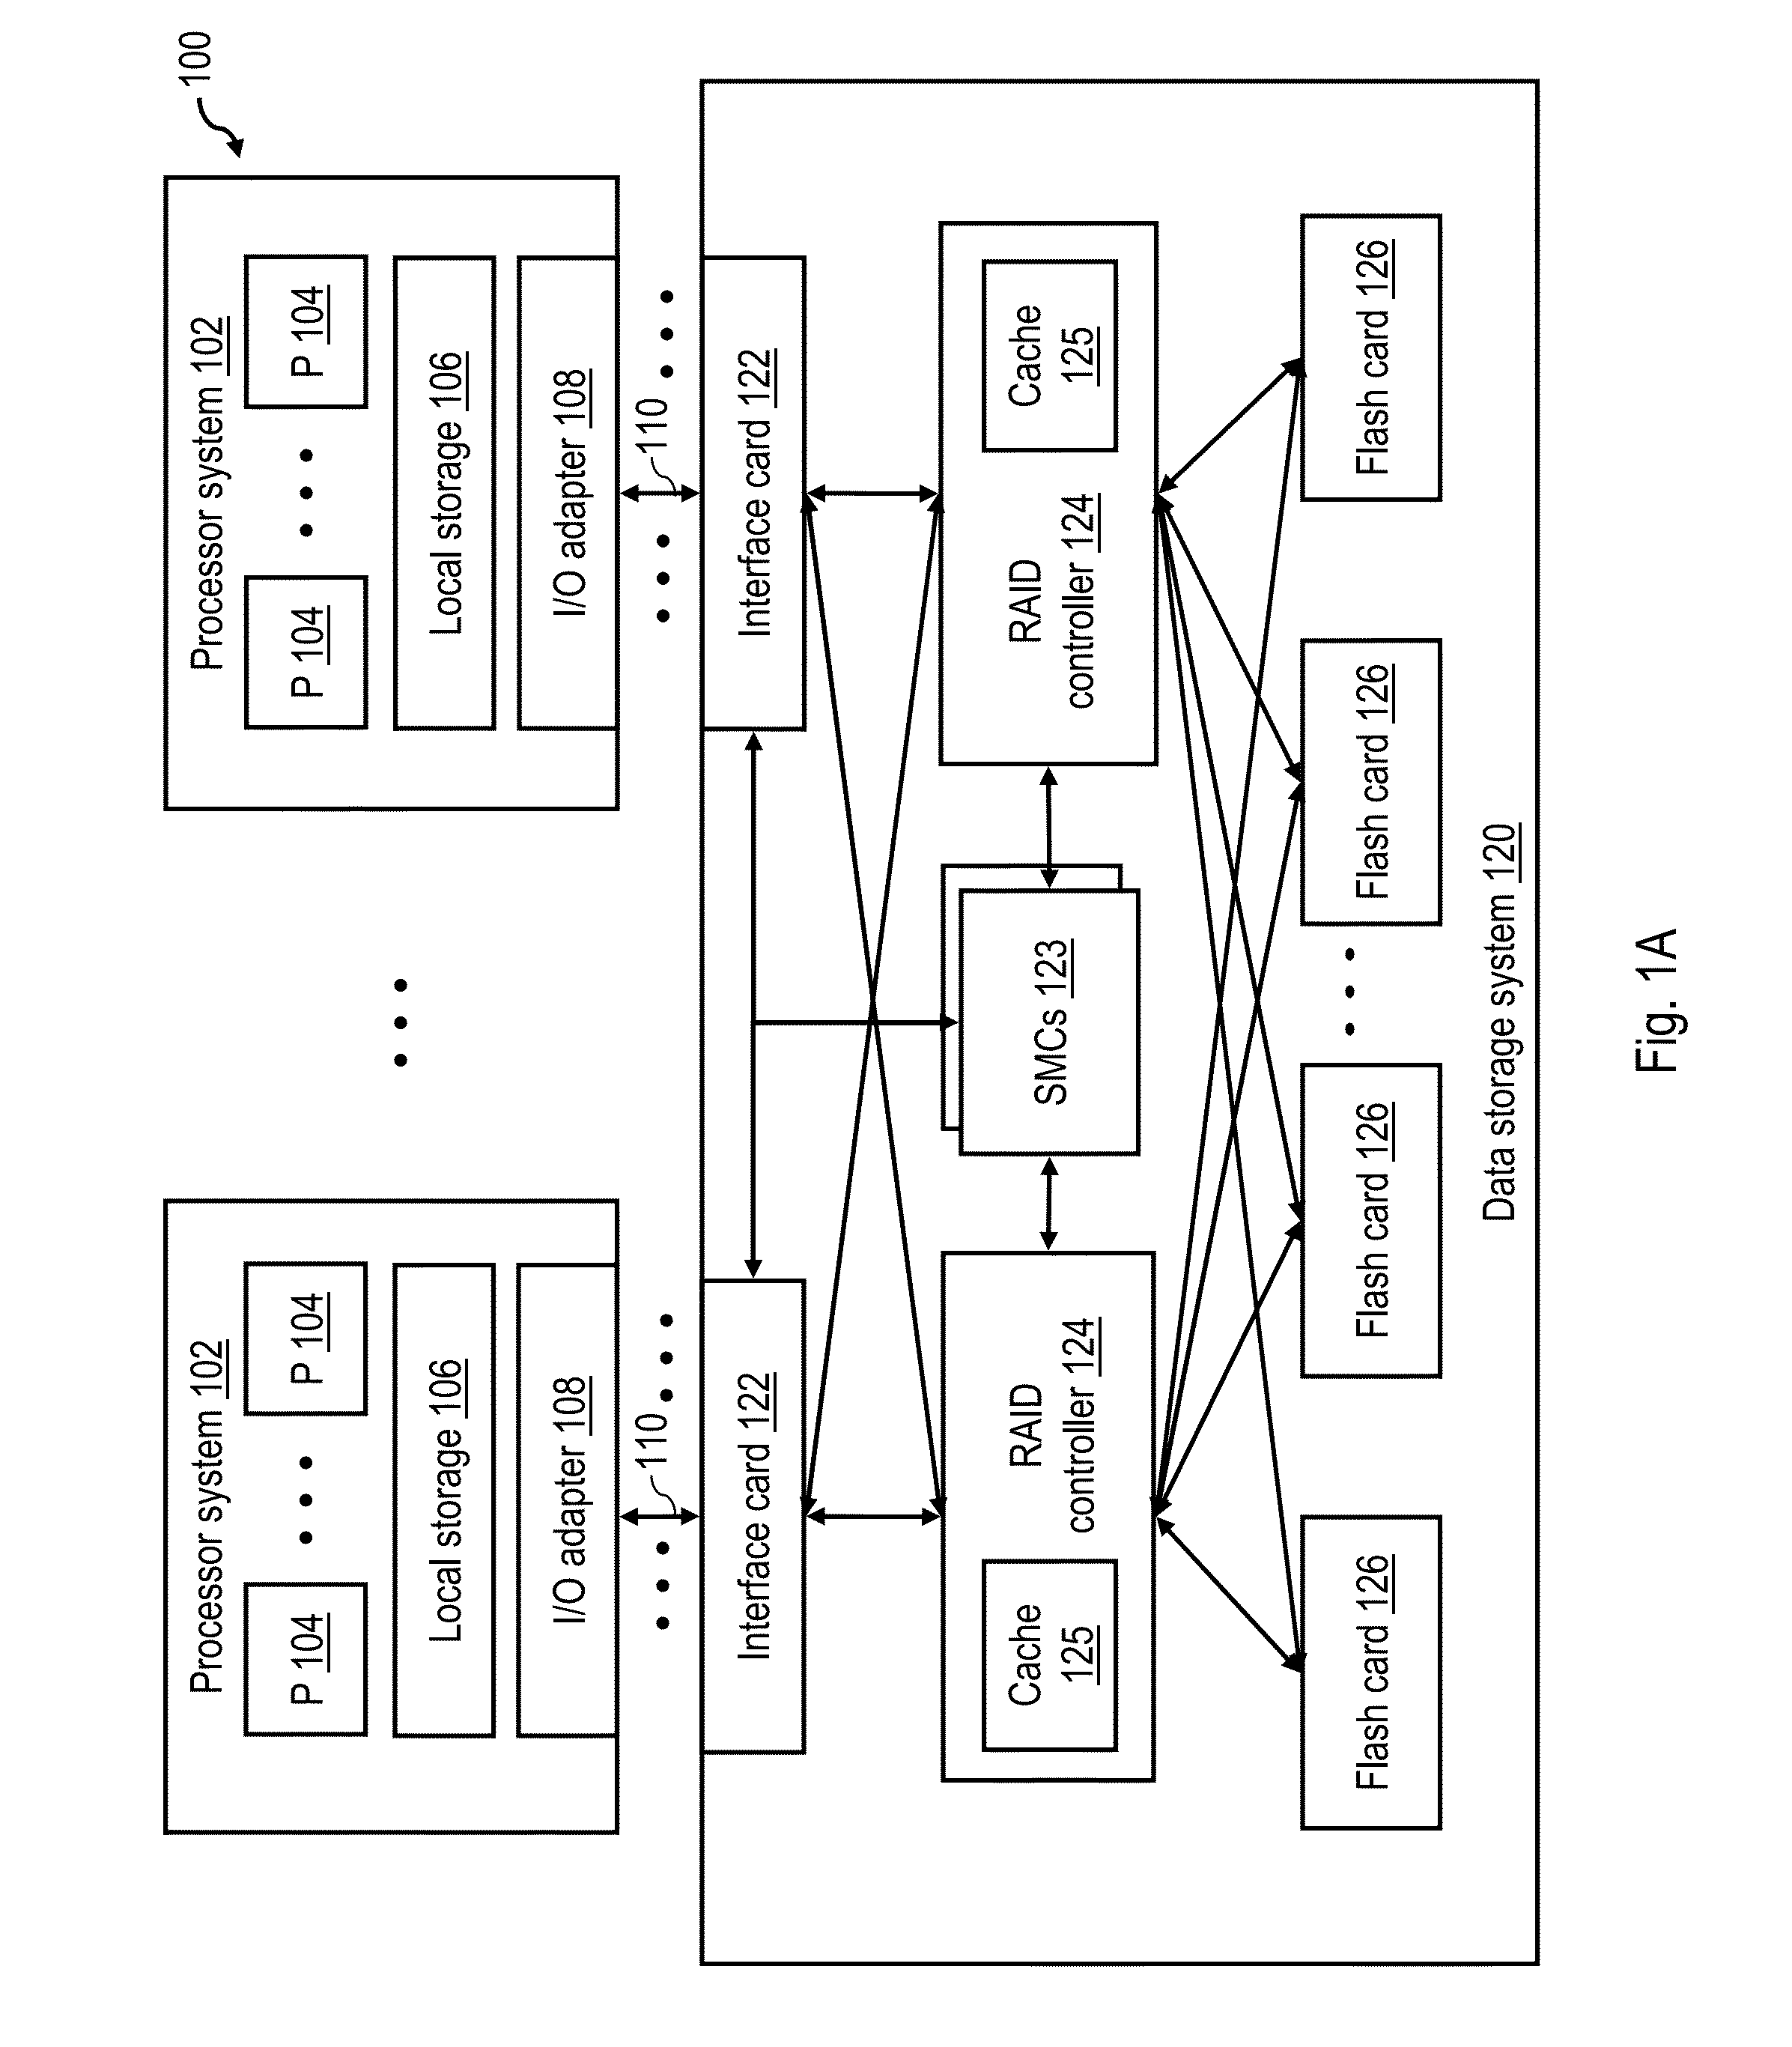 Promoting consistent response times in a data storage system having multiple data retrieval mechanisms